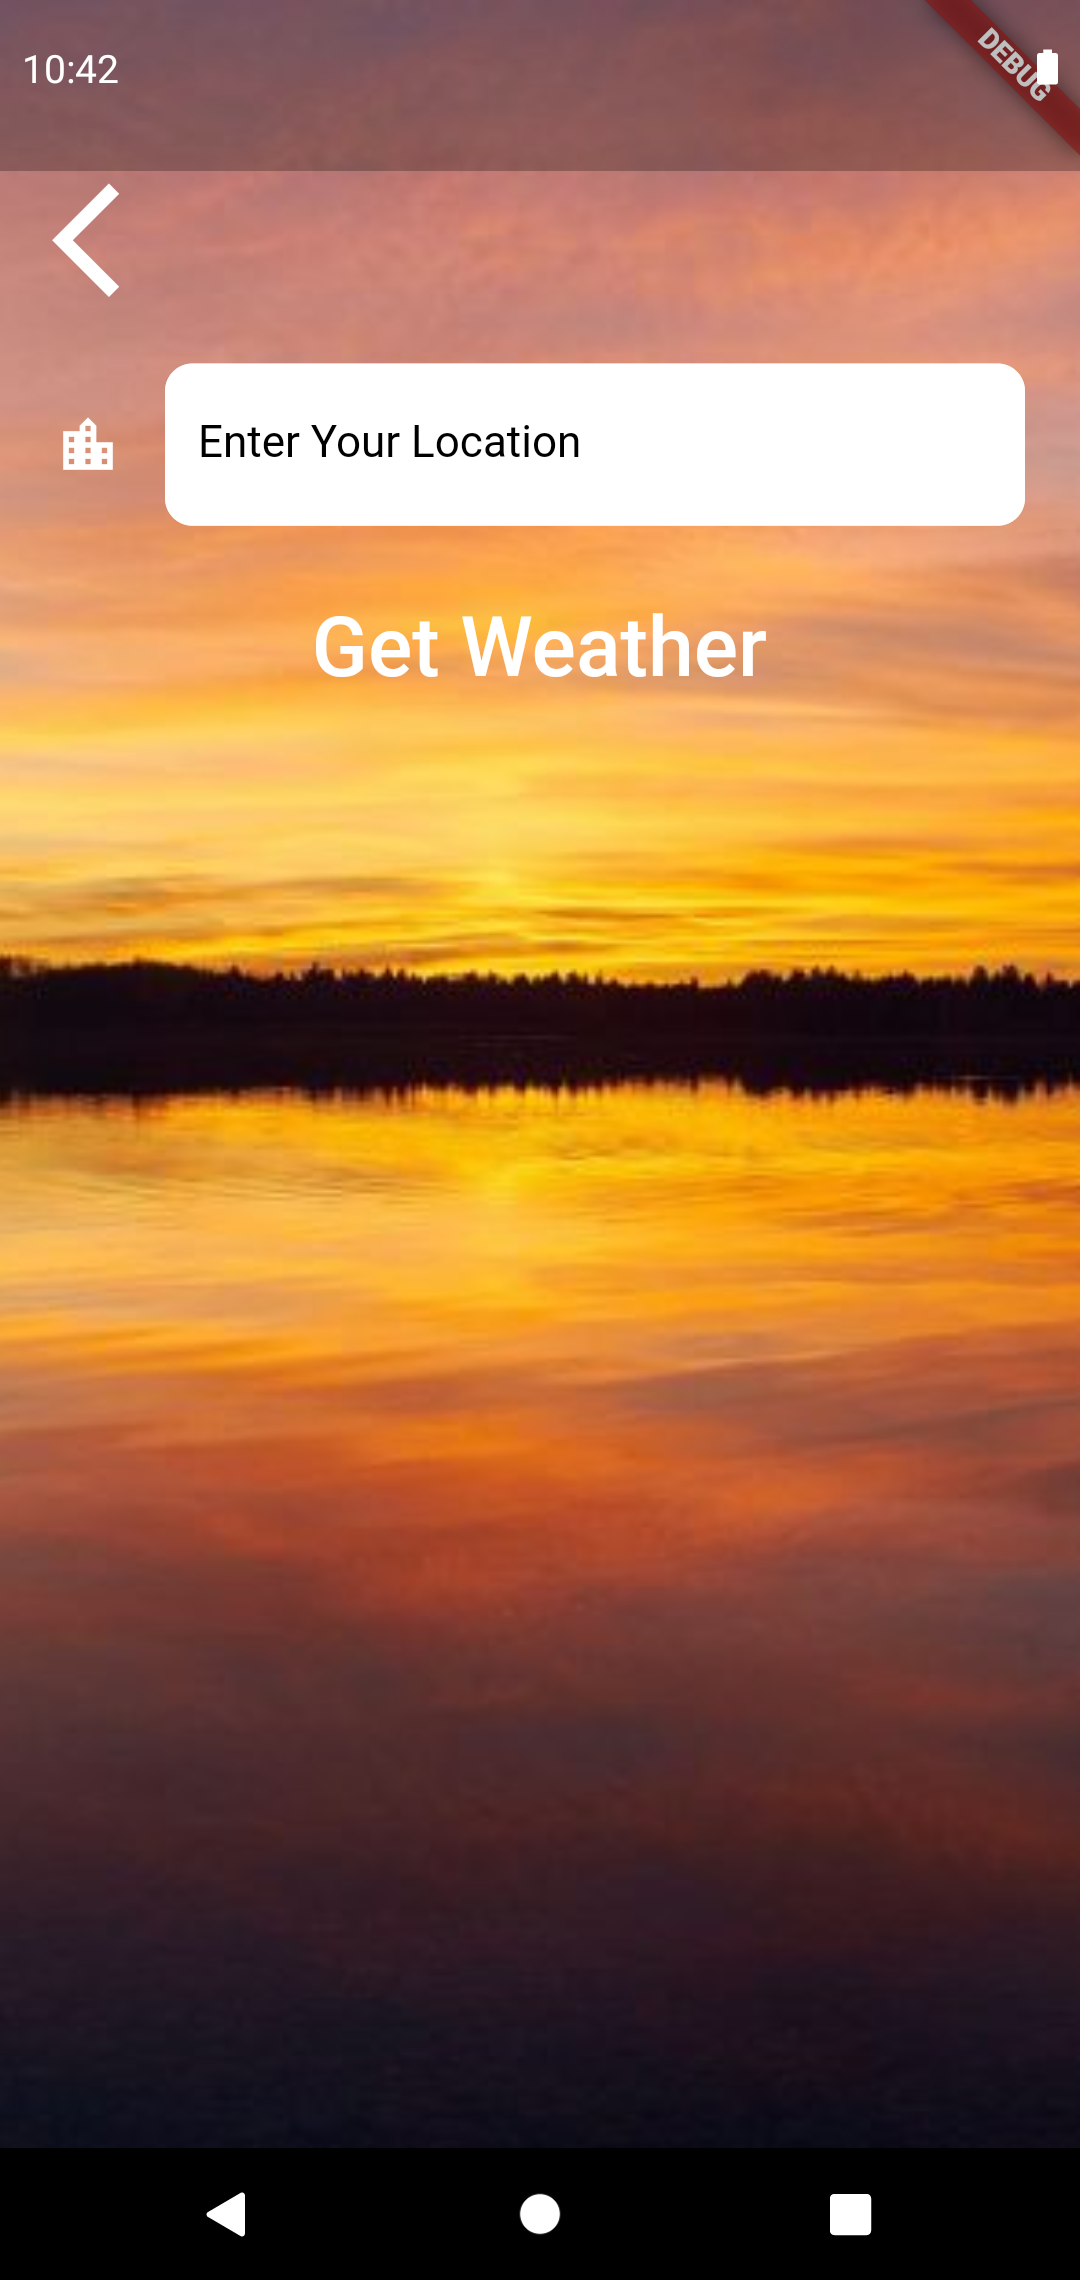 Weather Forecast Application devlopped with Flutter